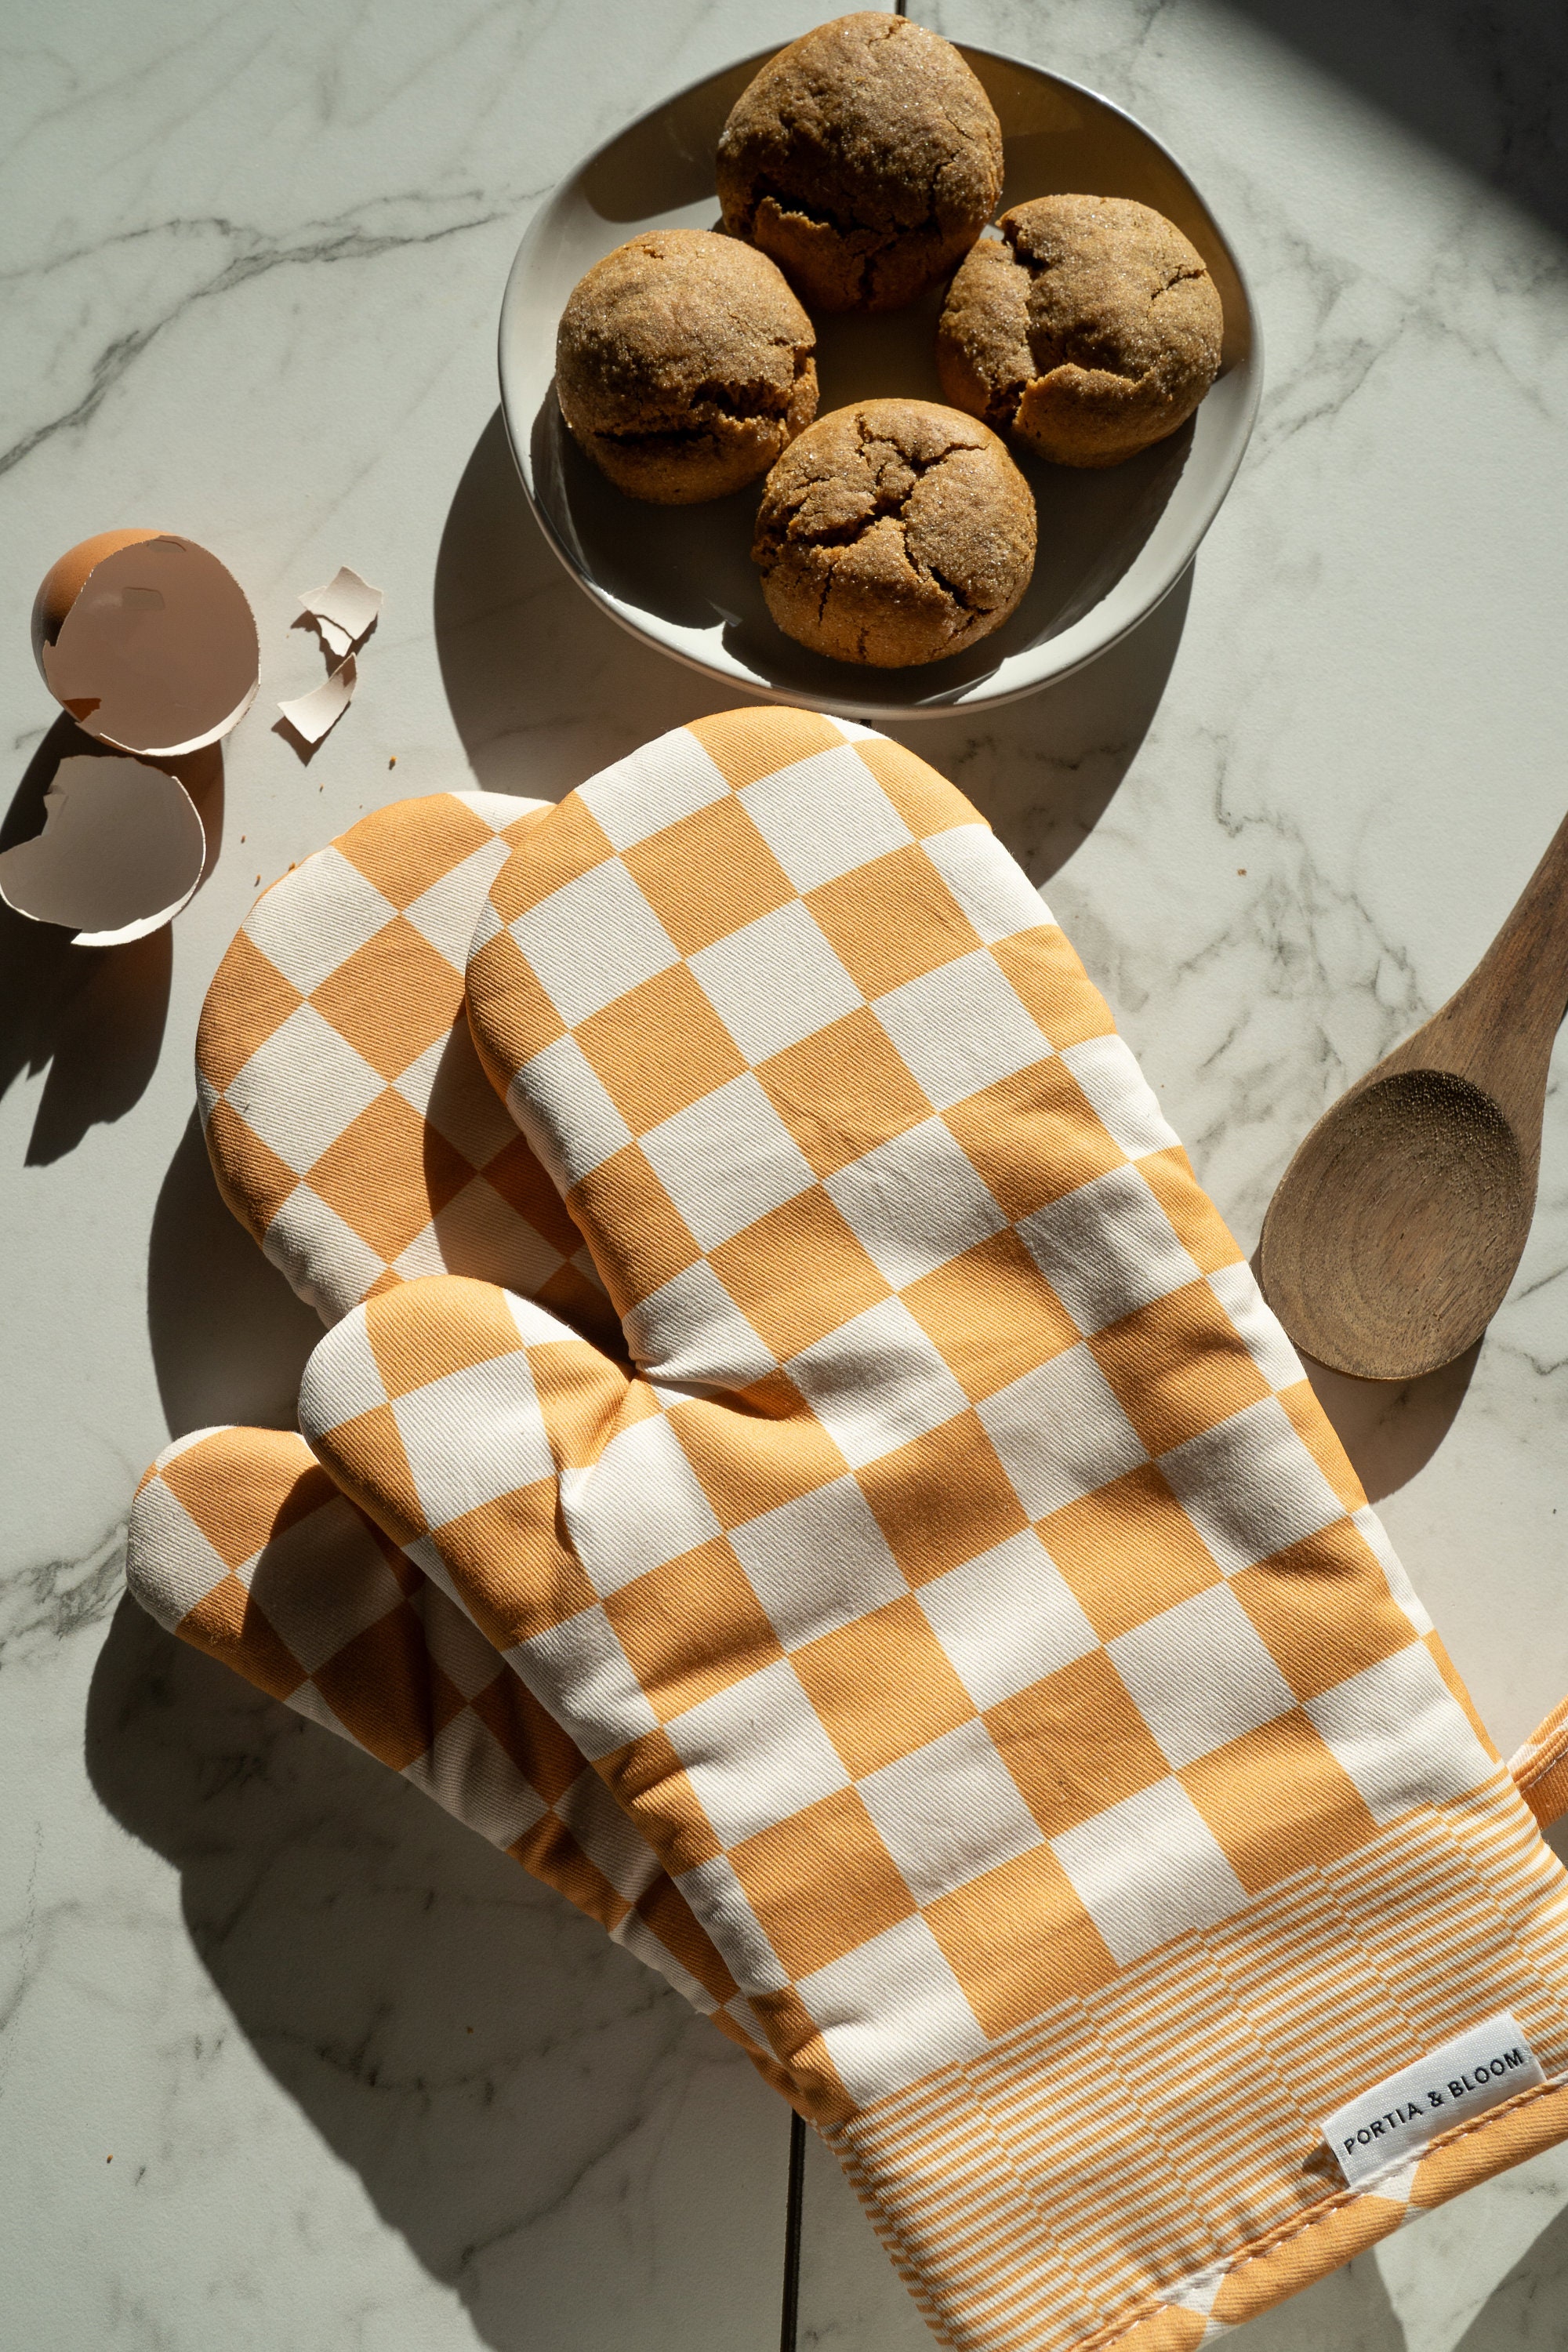 Organic Cotton Oven Mitts On Sale - A Greener Kitchen